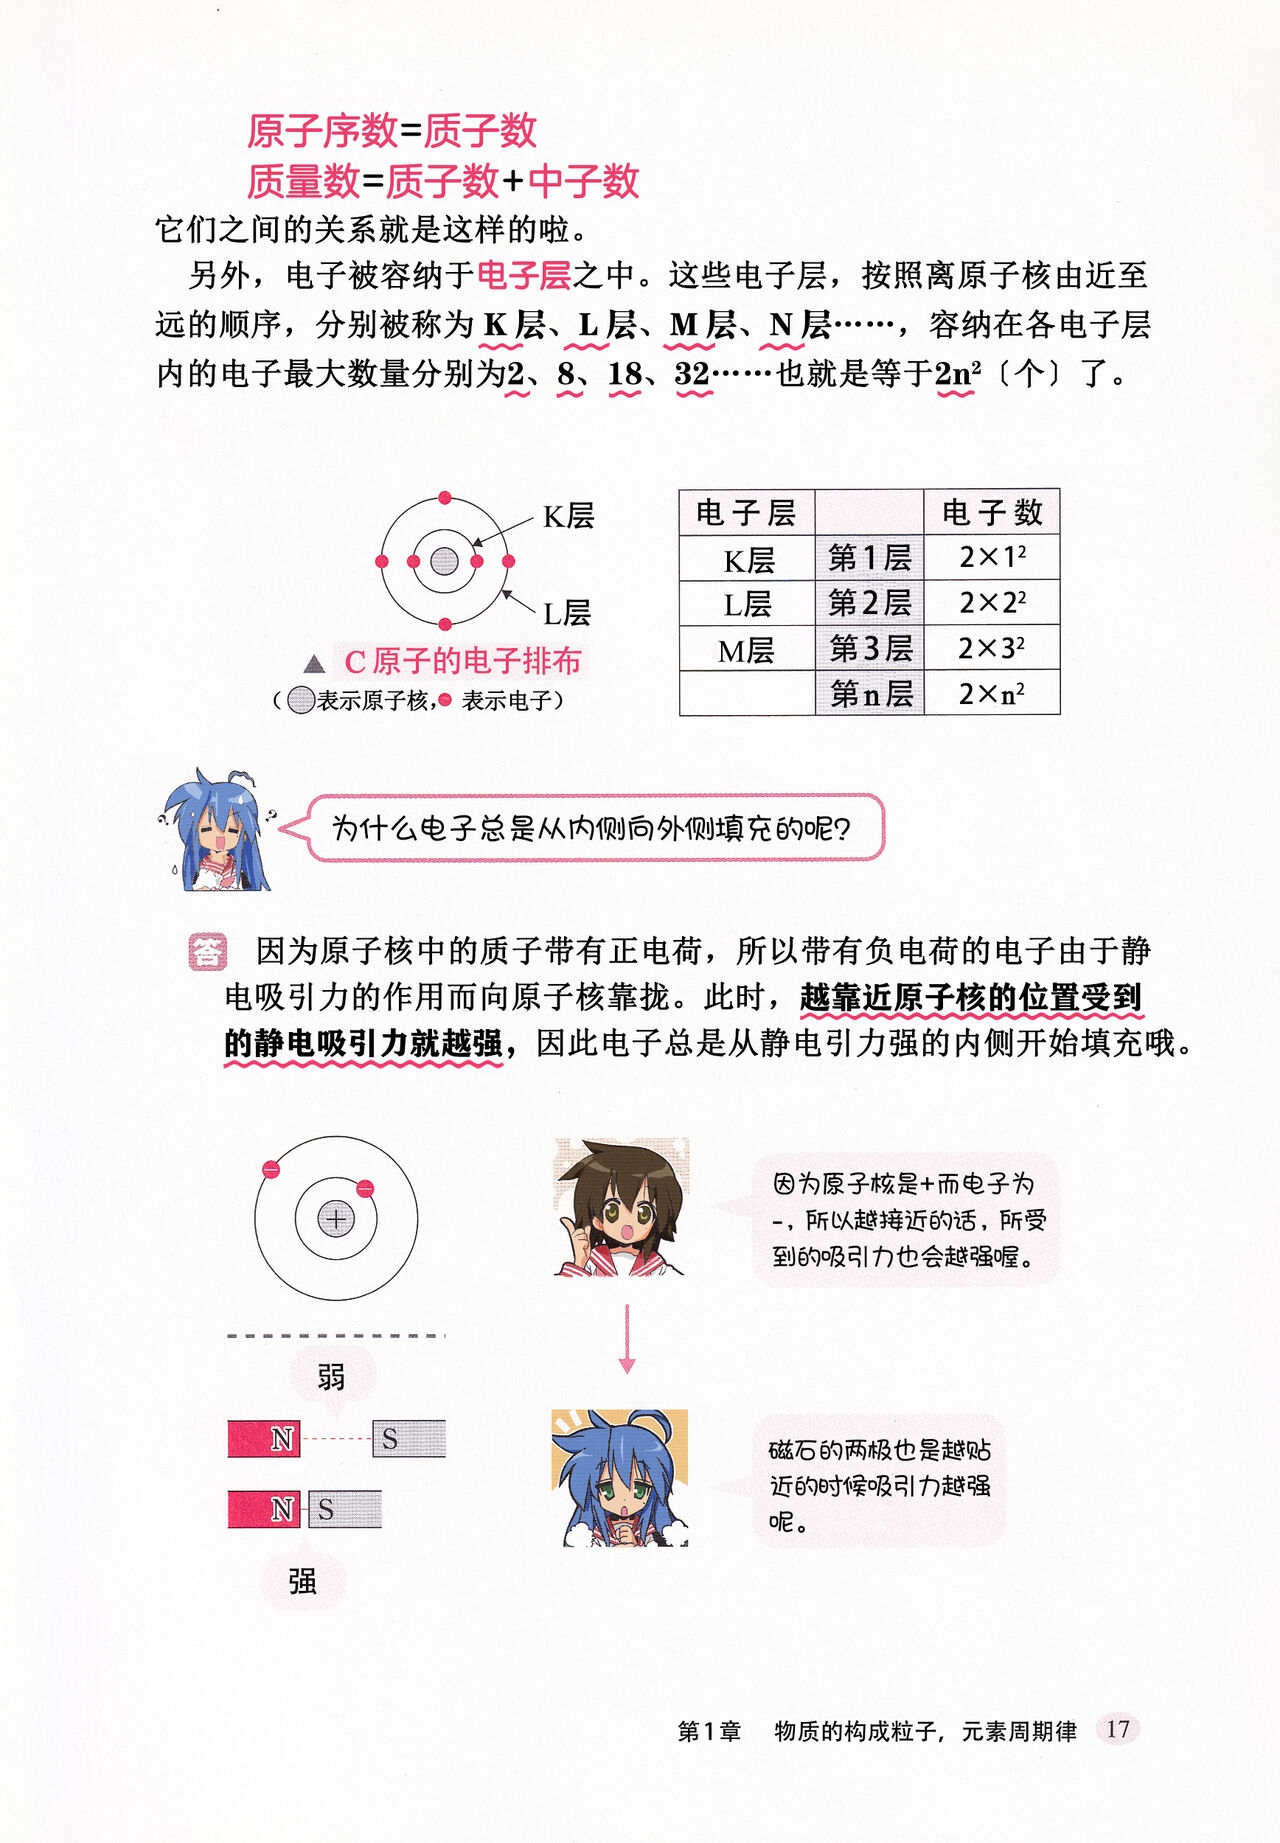 Let's Learn Chemistry with Lucky☆Star -Basic Theory- Section 1-5|和幸运星一起学化学 -理论篇- 第1-5章[Chinese][桃樹漢化組] 23